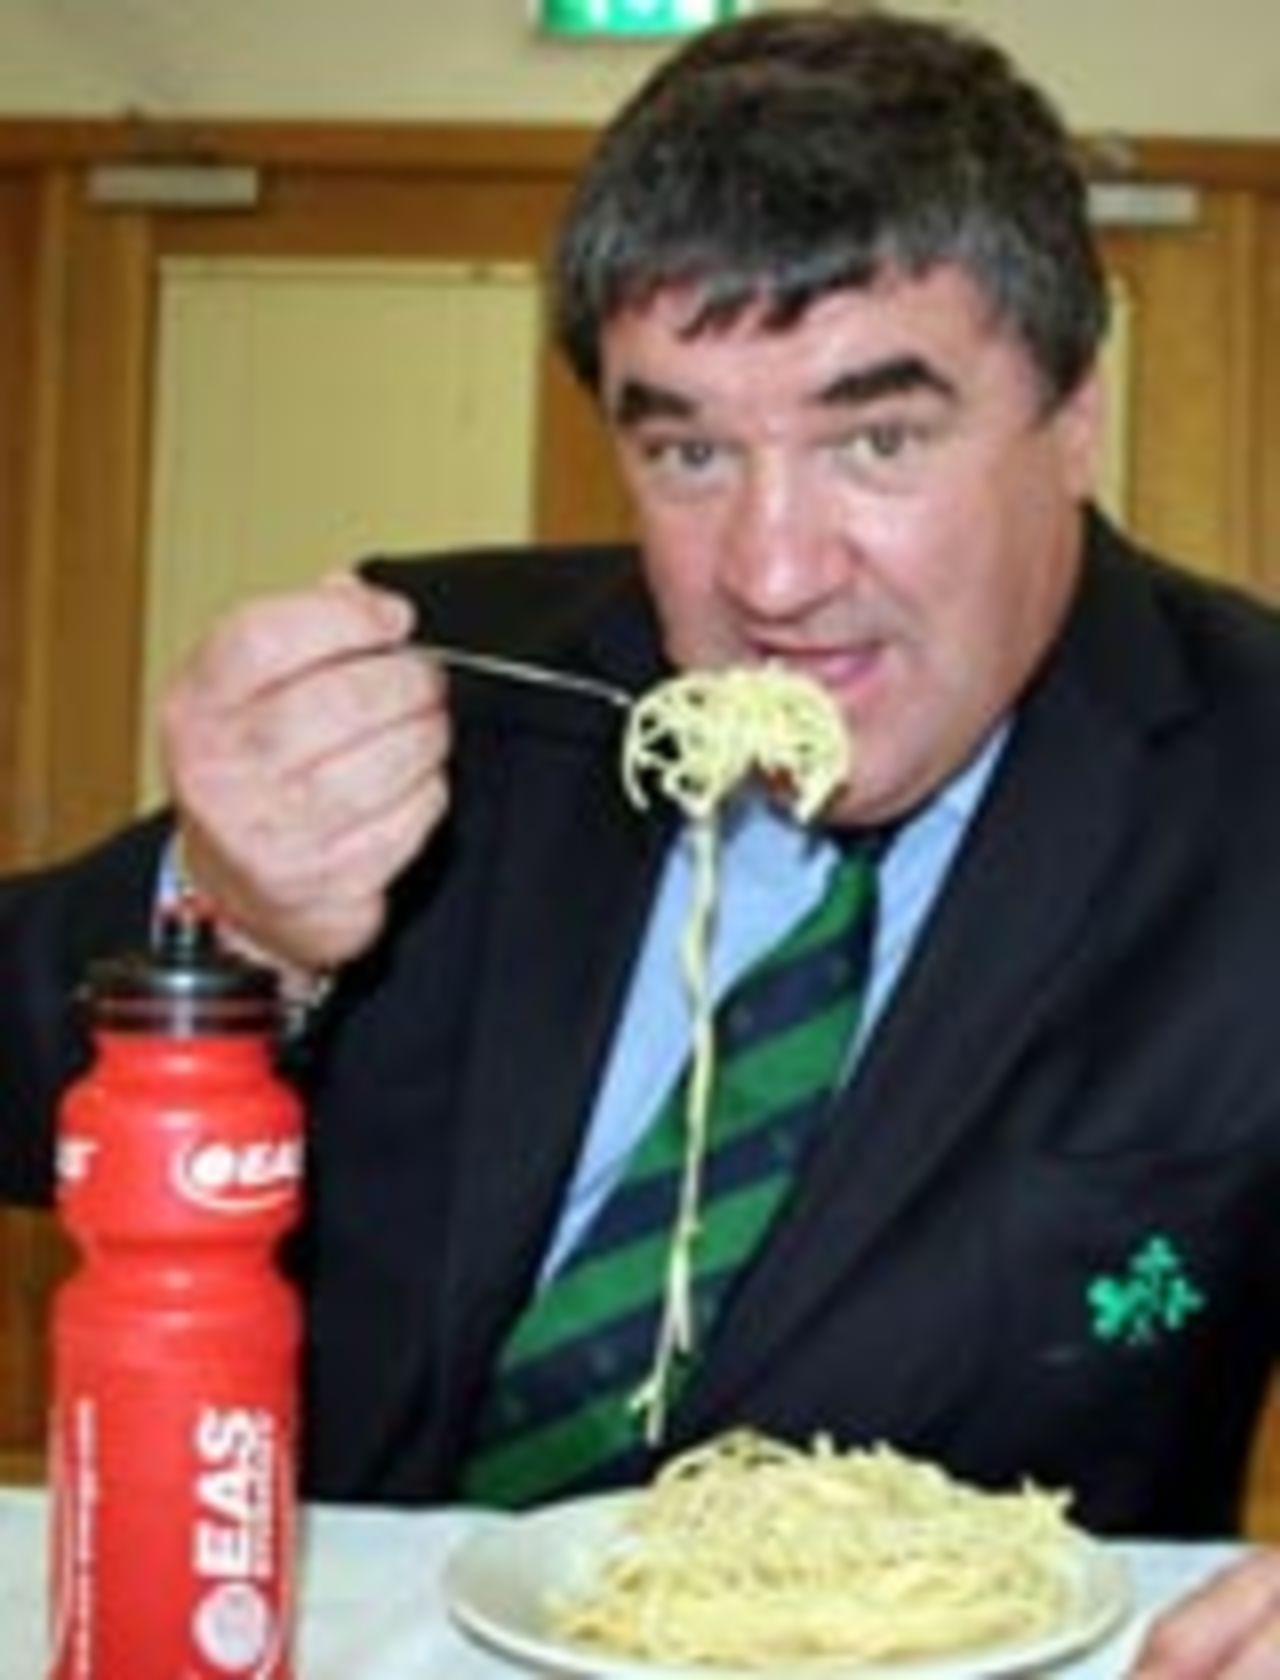 The Ireland manager, Roy Torrens, tucks into some healthy food on the launch of Ireland's fitness drive, May 26, 2006